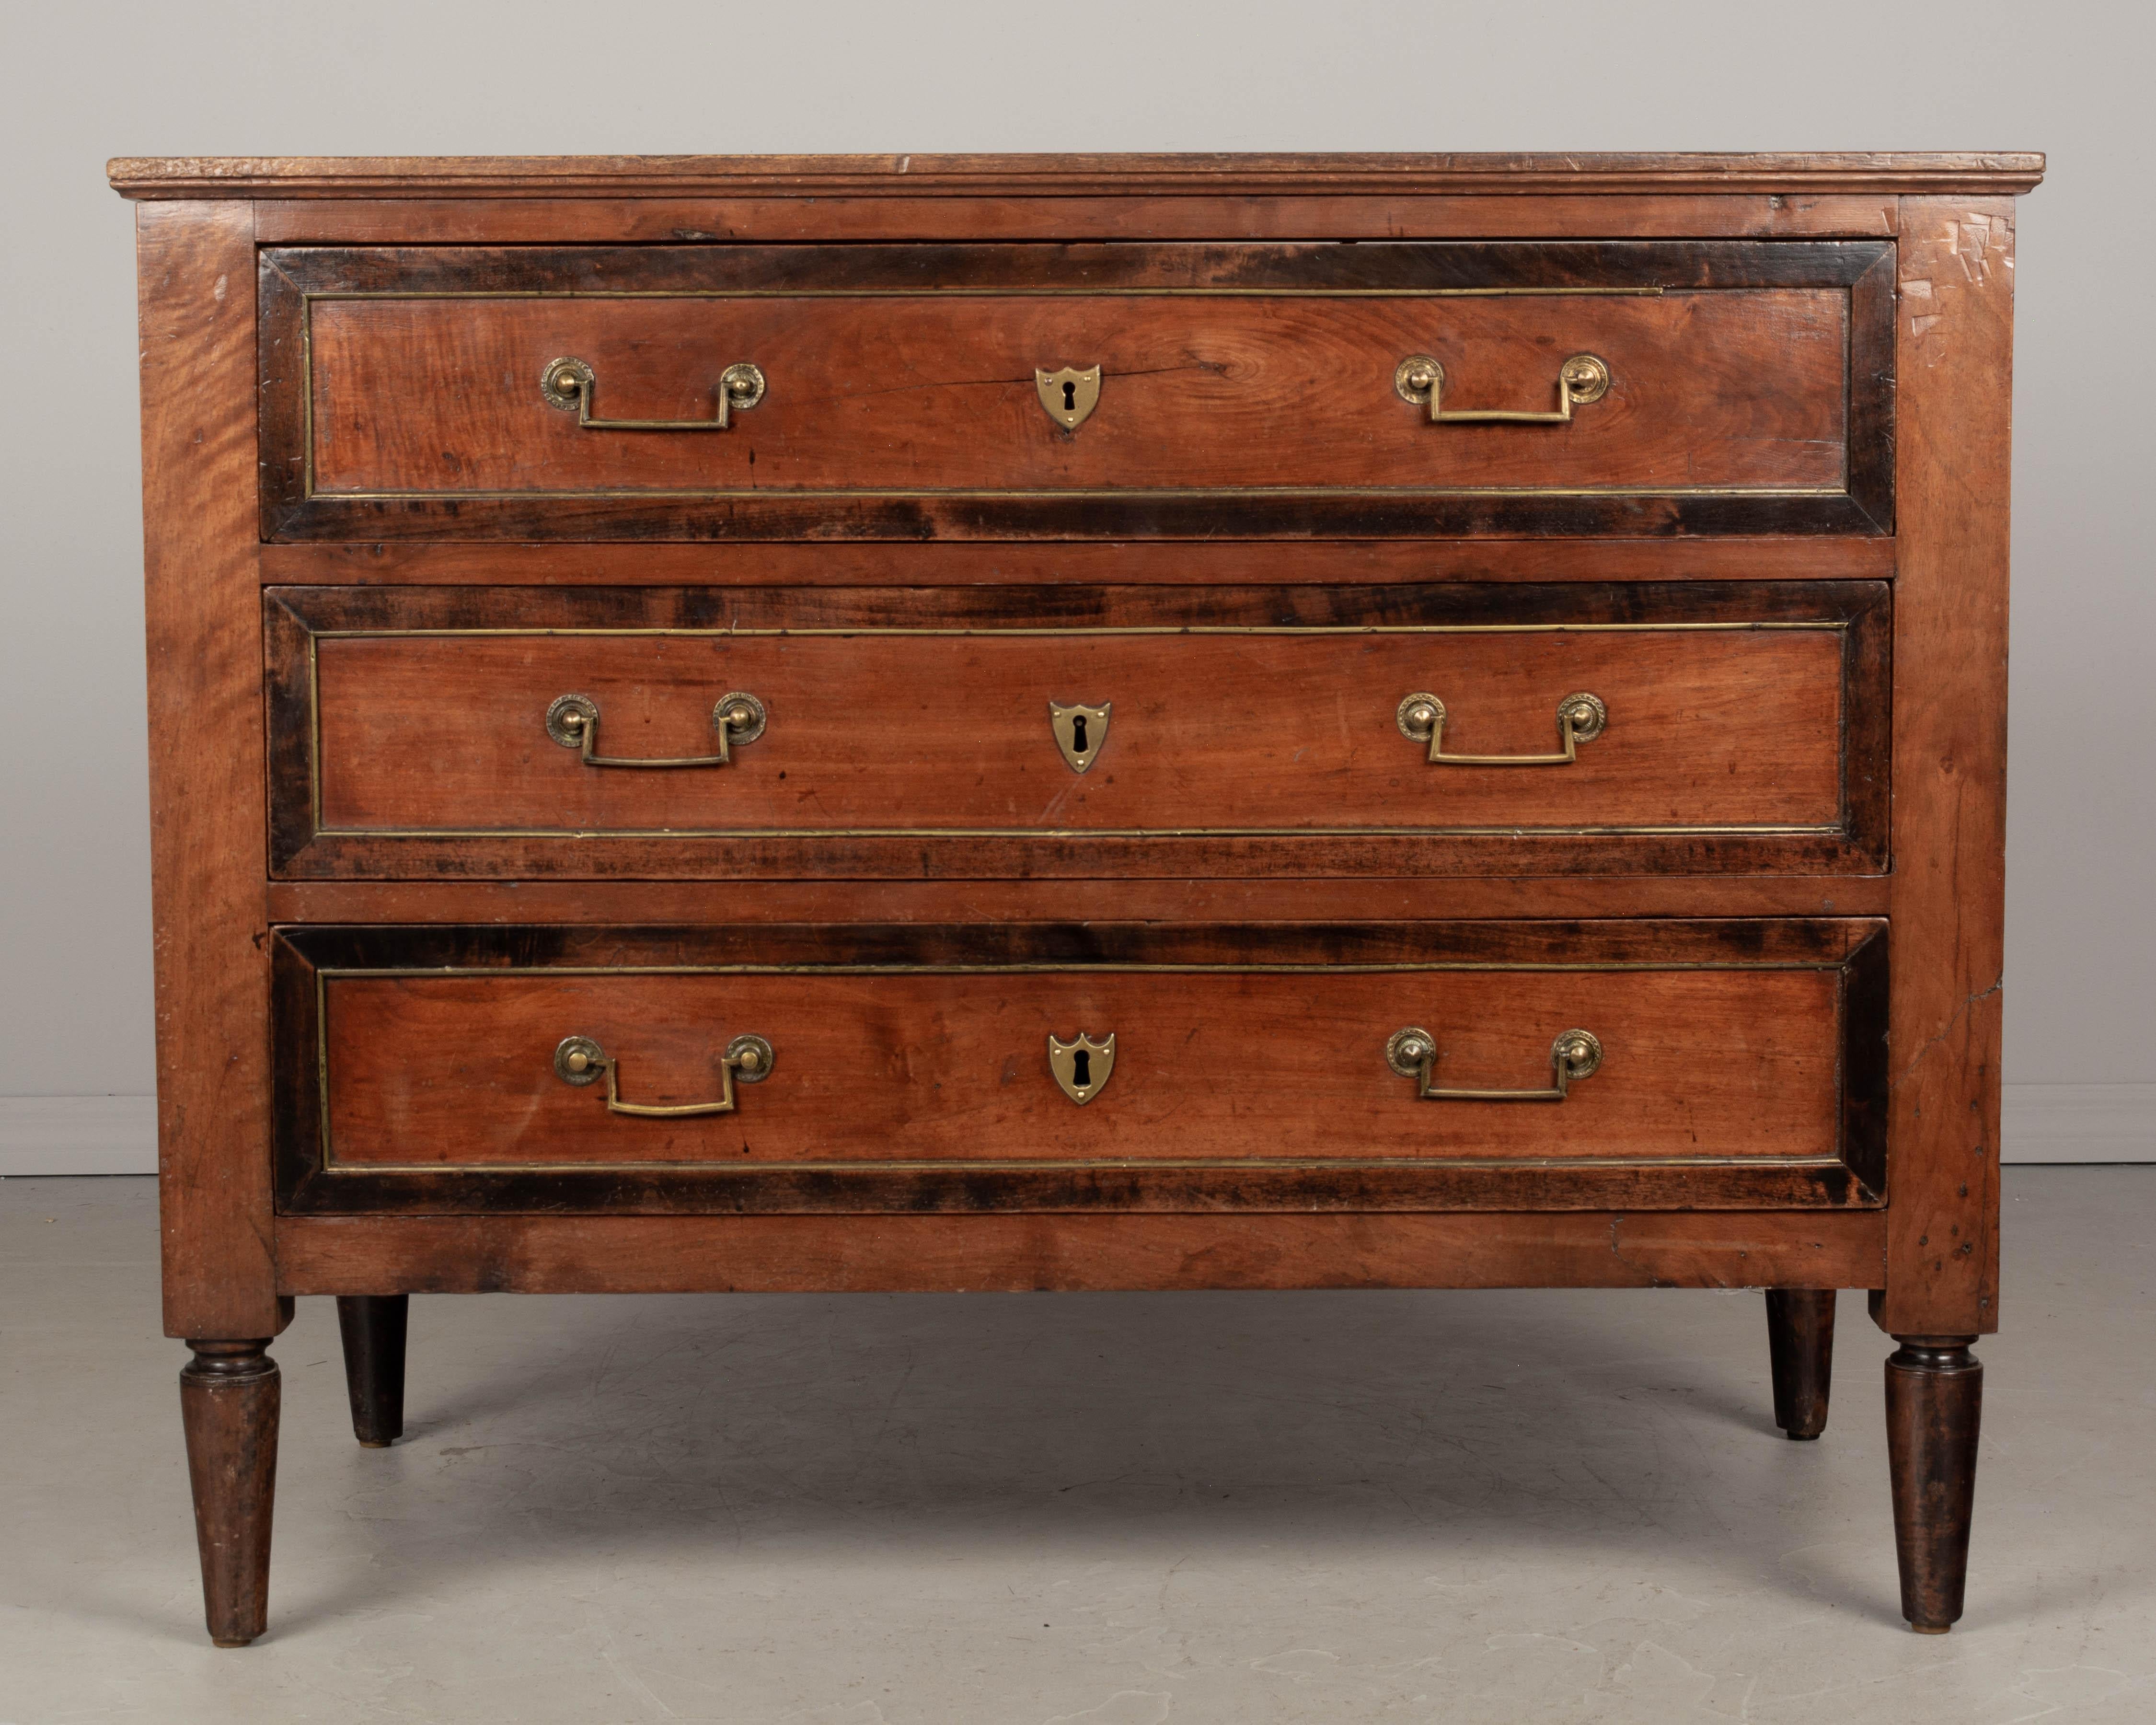 19th Century French Louis XVI Style Walnut Commode In Good Condition For Sale In Winter Park, FL